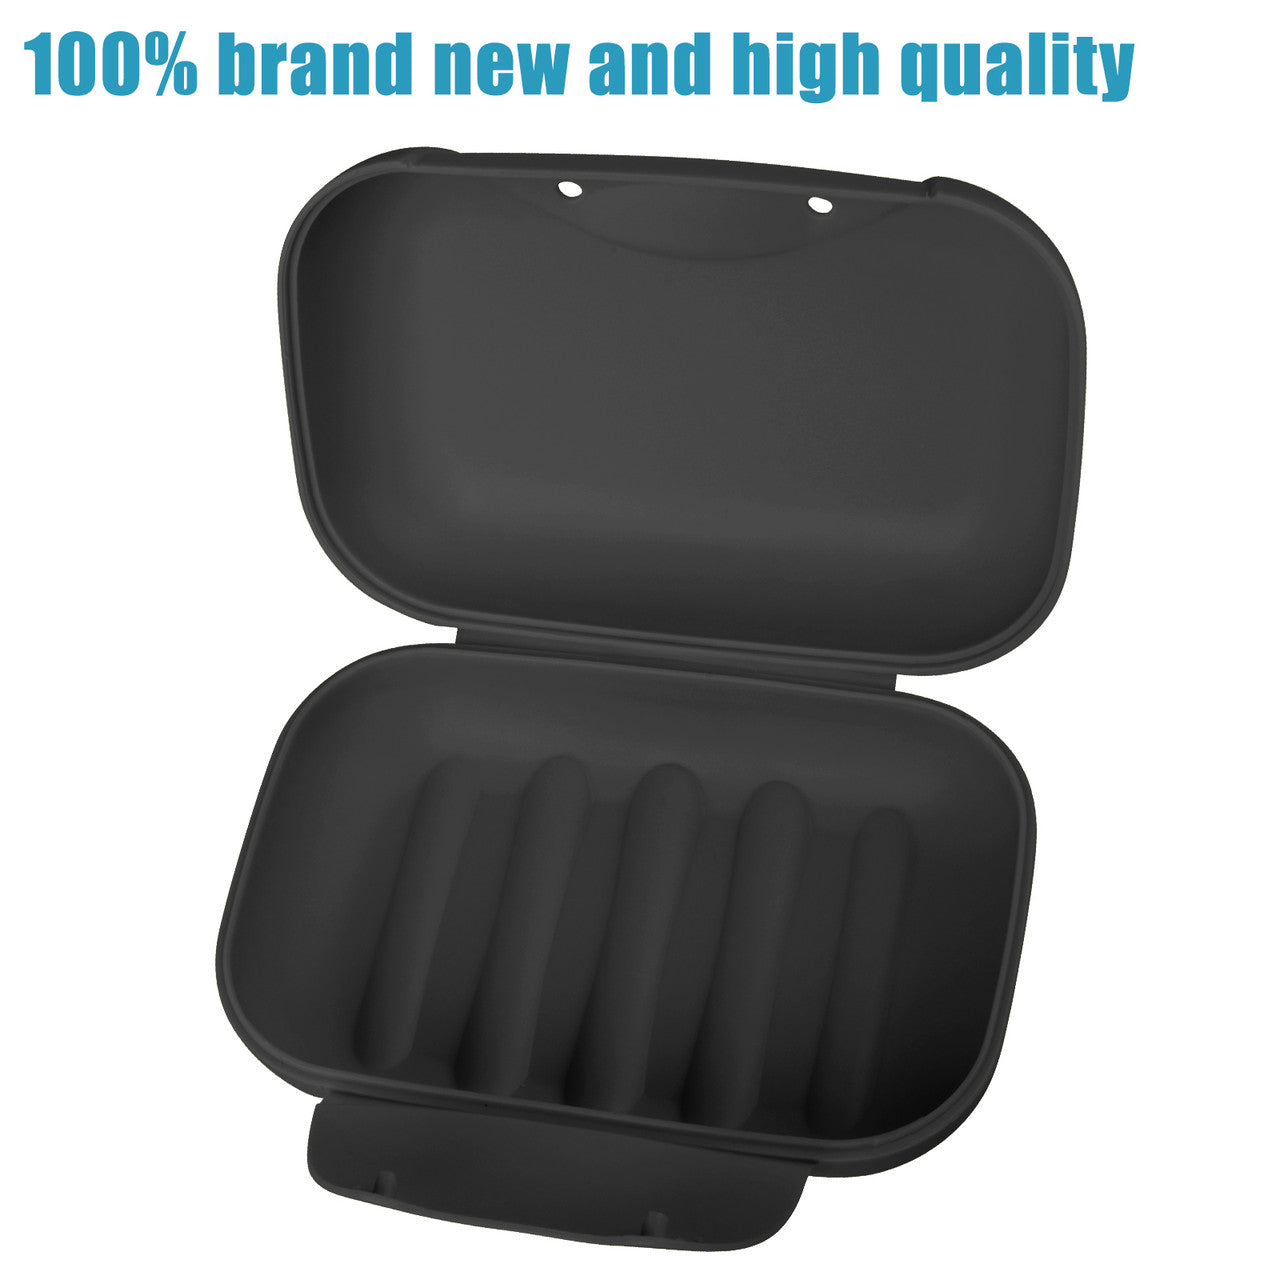 Soap Dish With Lock for Travel, Bathroom and Kitchen, Black